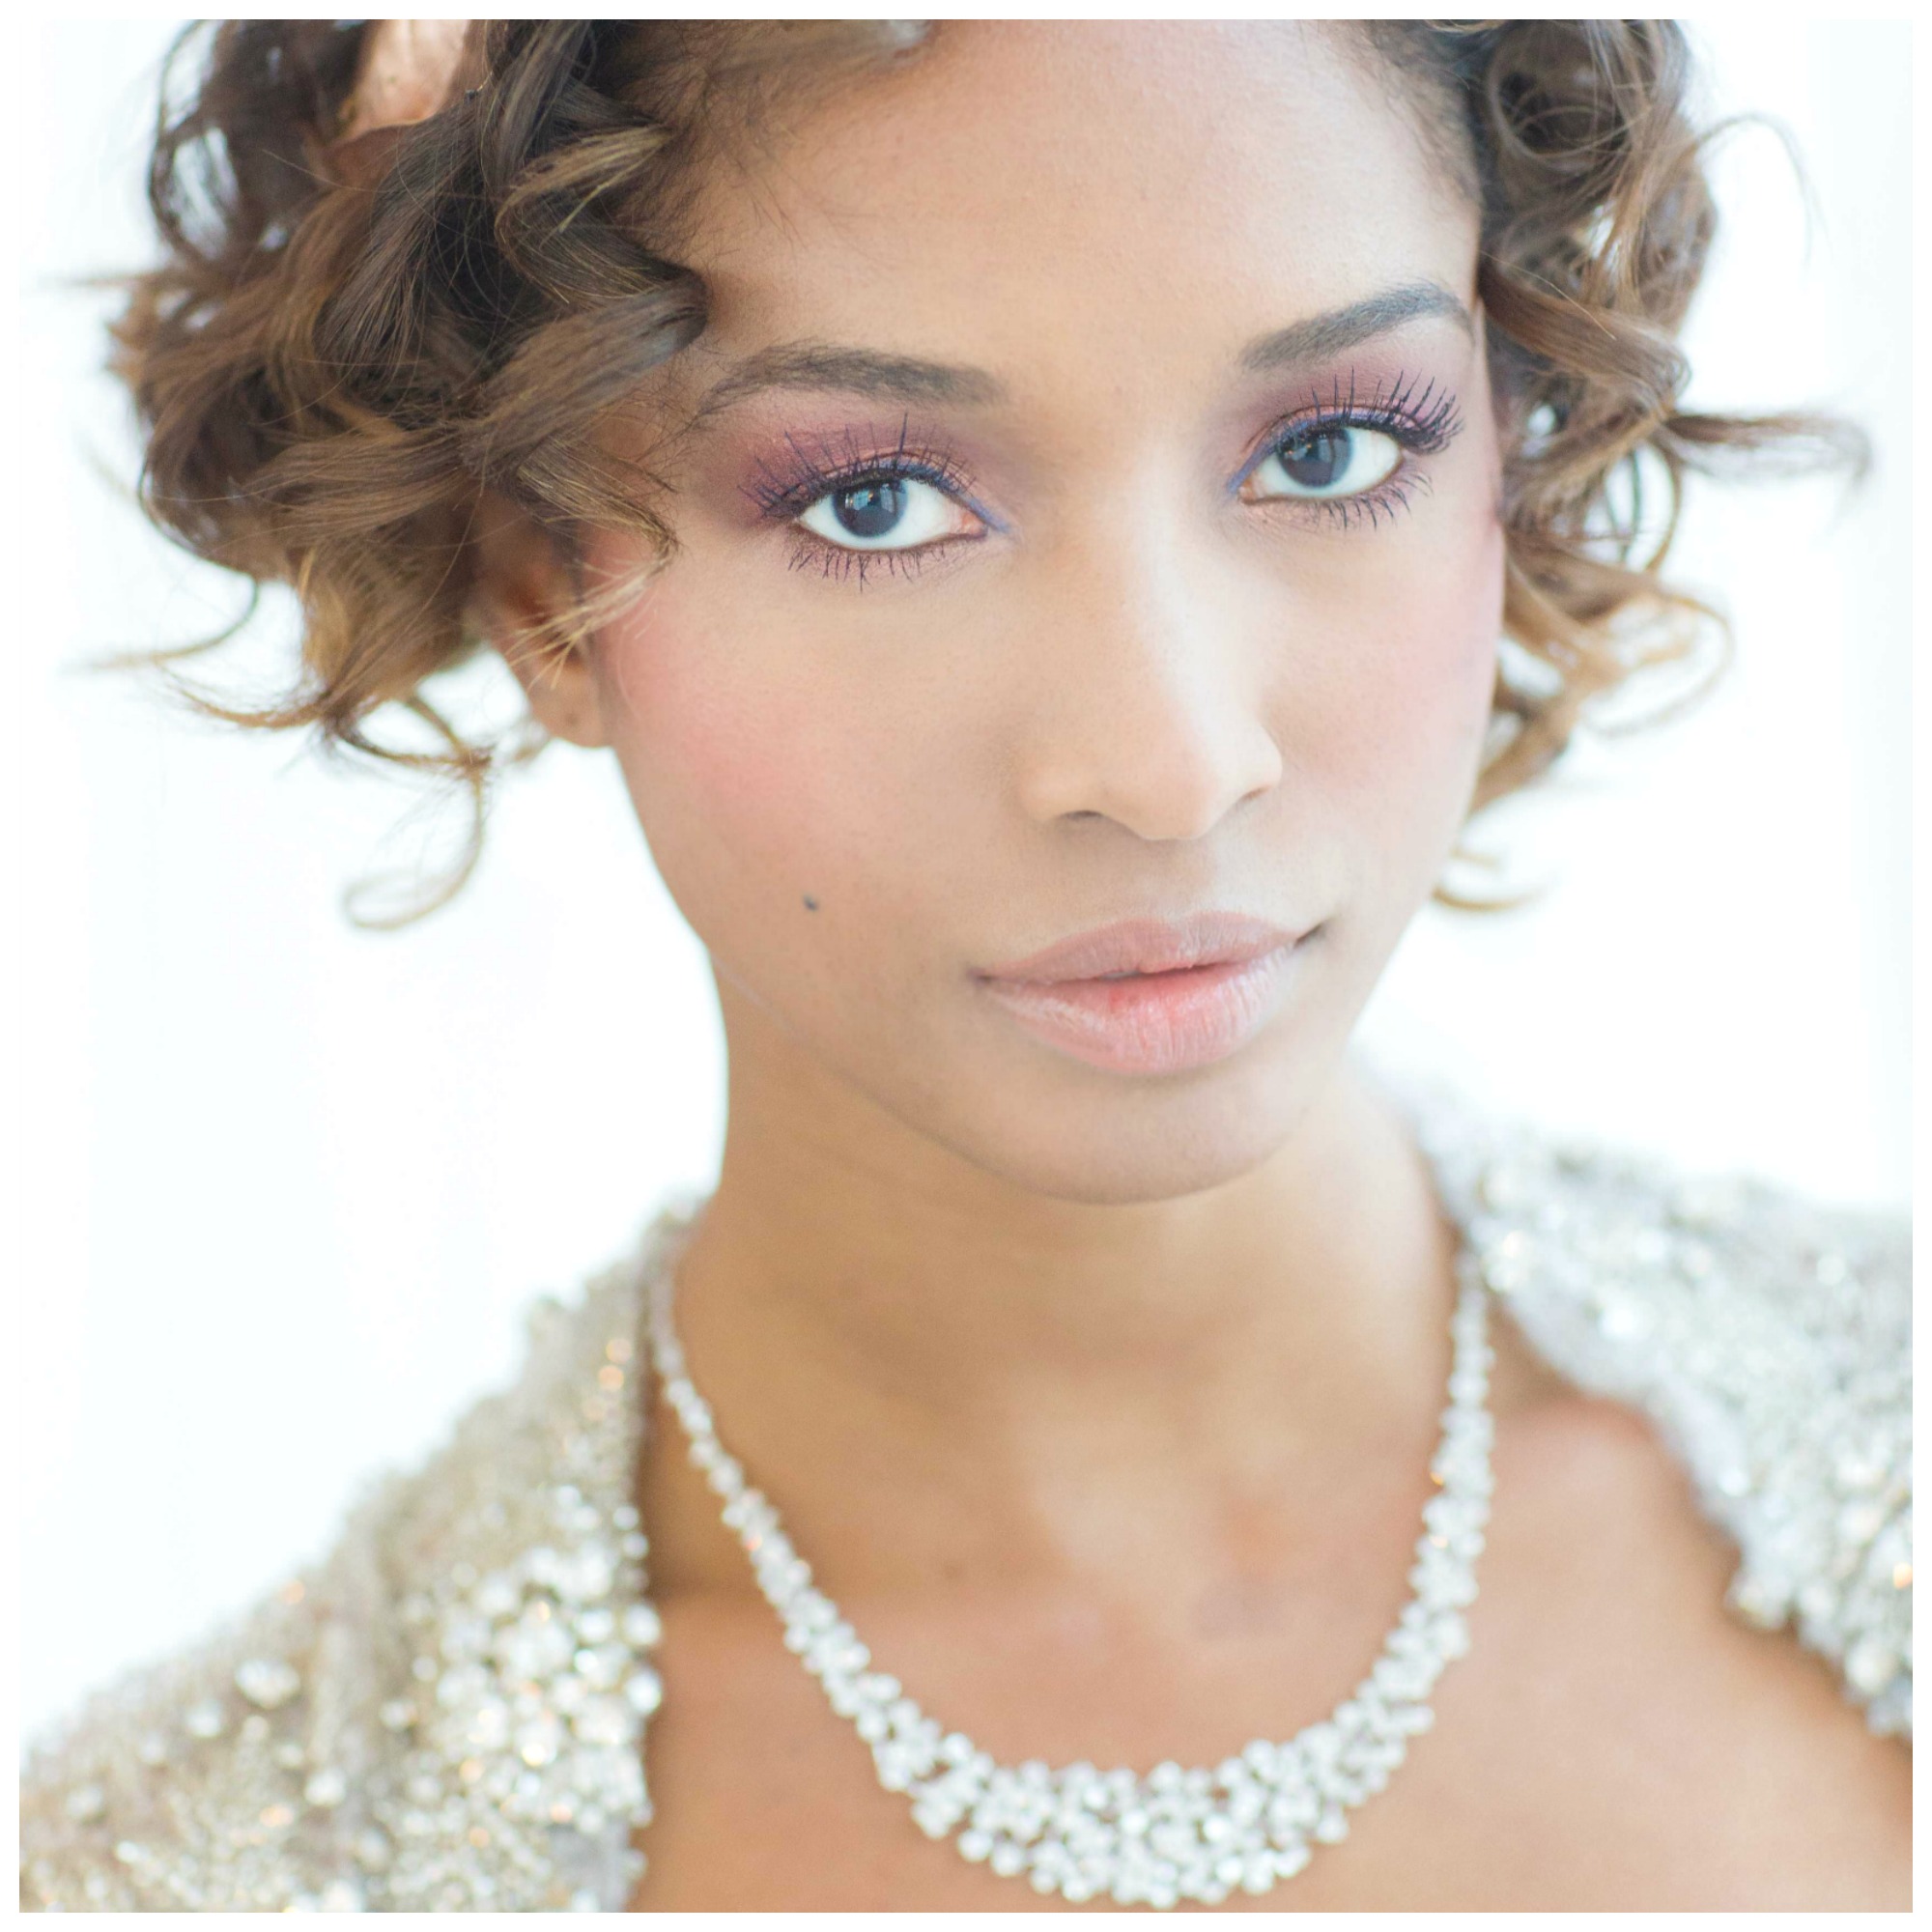 Bride in sparkling wedding gown, diamond necklace, and soft romantic makeup